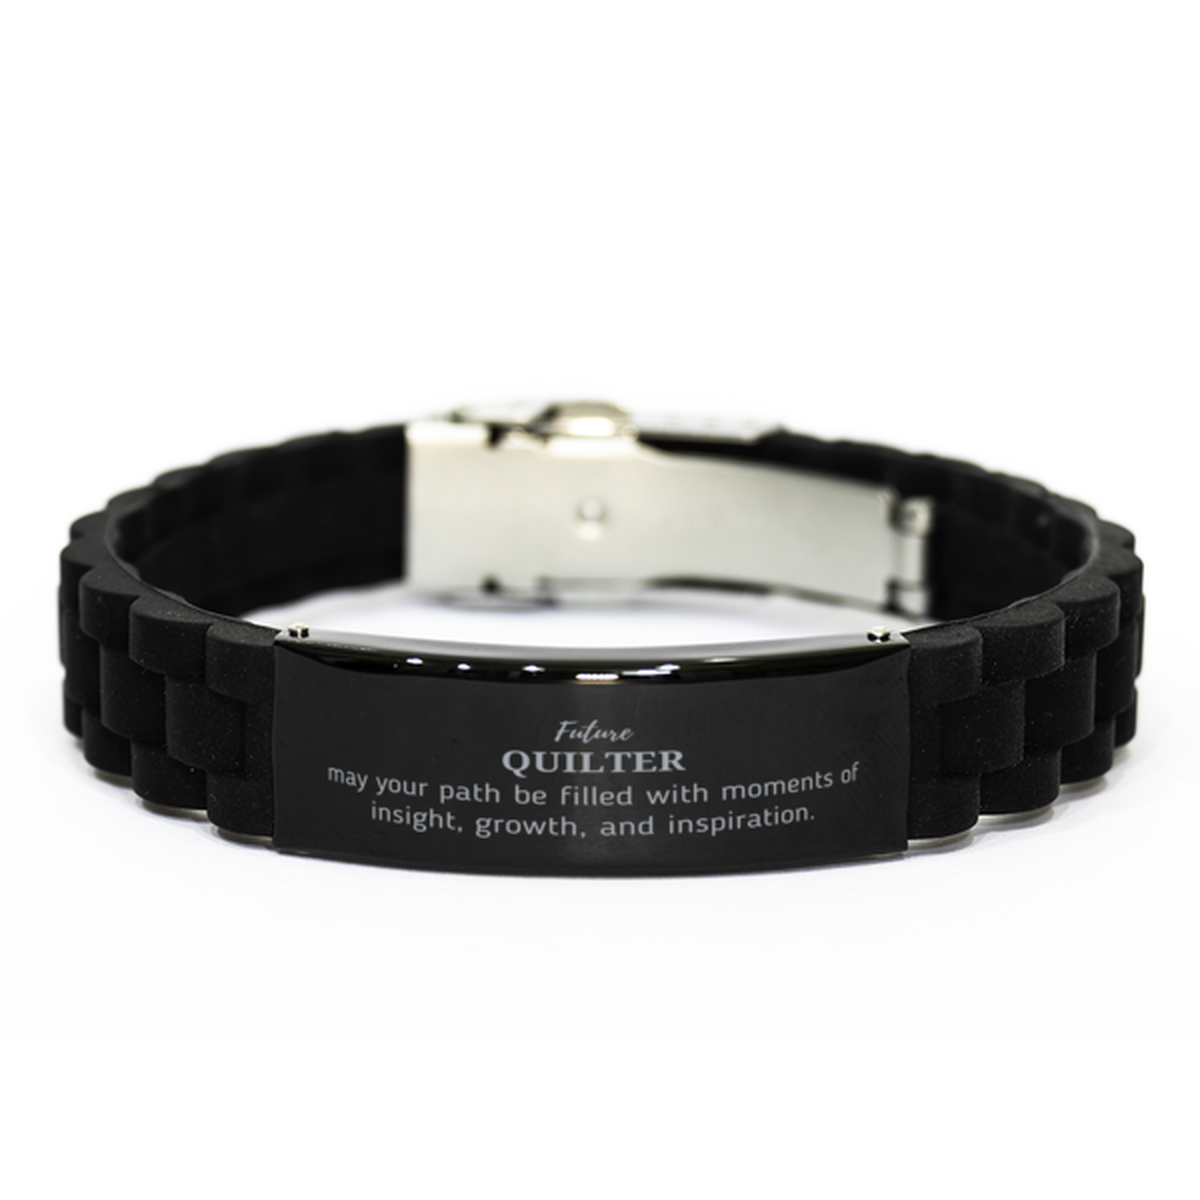 Future Quilter Gifts, May your path be filled with moments of insight, Graduation Gifts for New Quilter, Christmas Unique Black Glidelock Clasp Bracelet For Men, Women, Friends